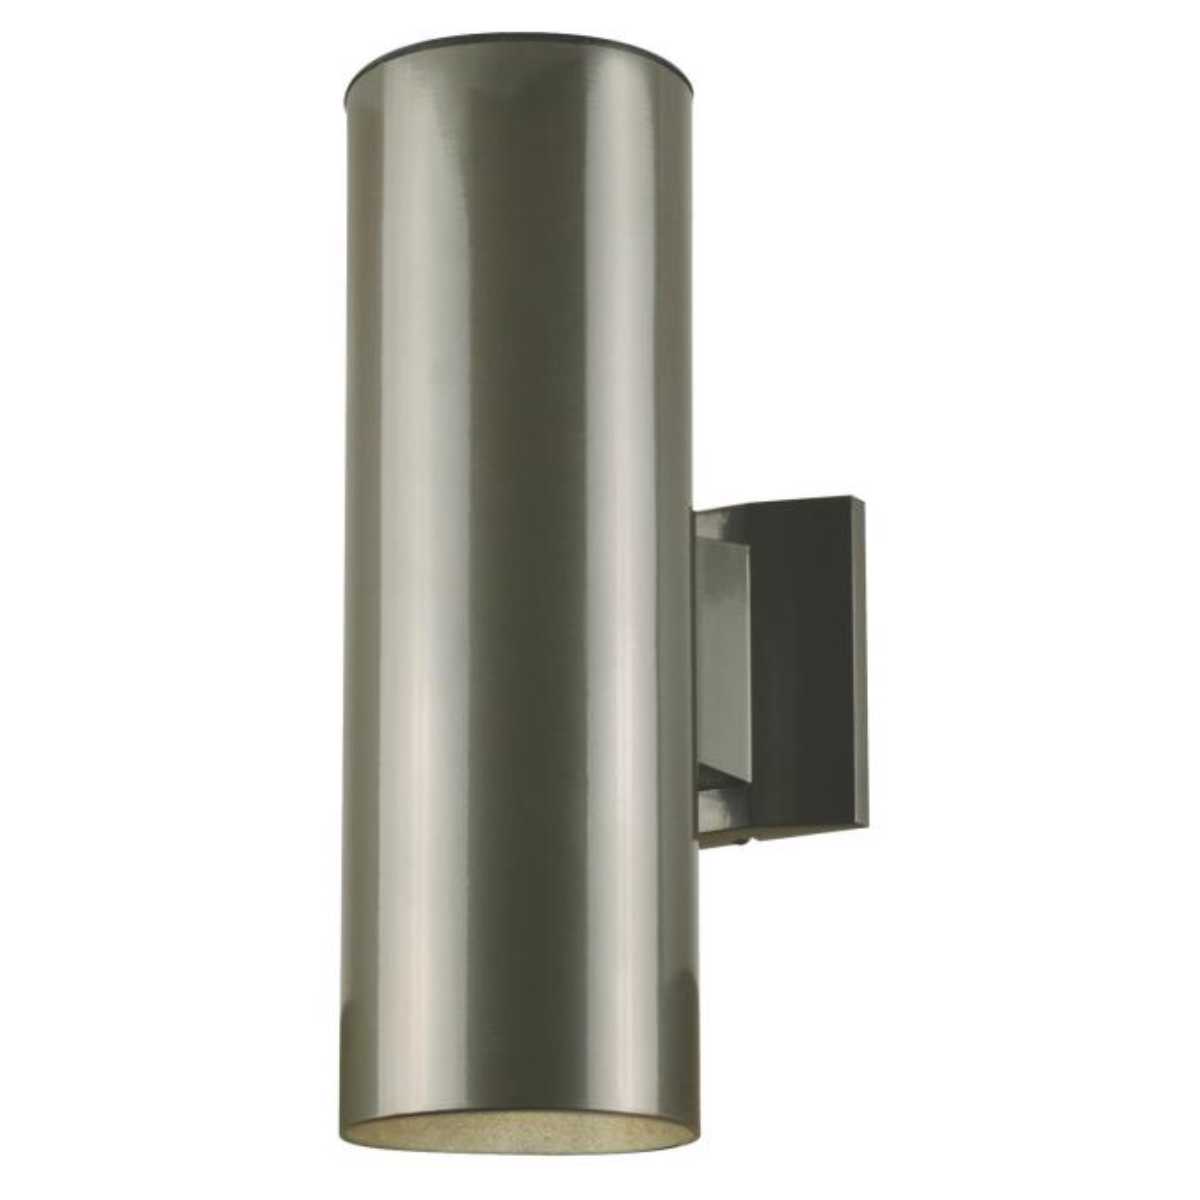 15 In 1 Light Outdoor Cylinder Wall Sconce Graphite Finish